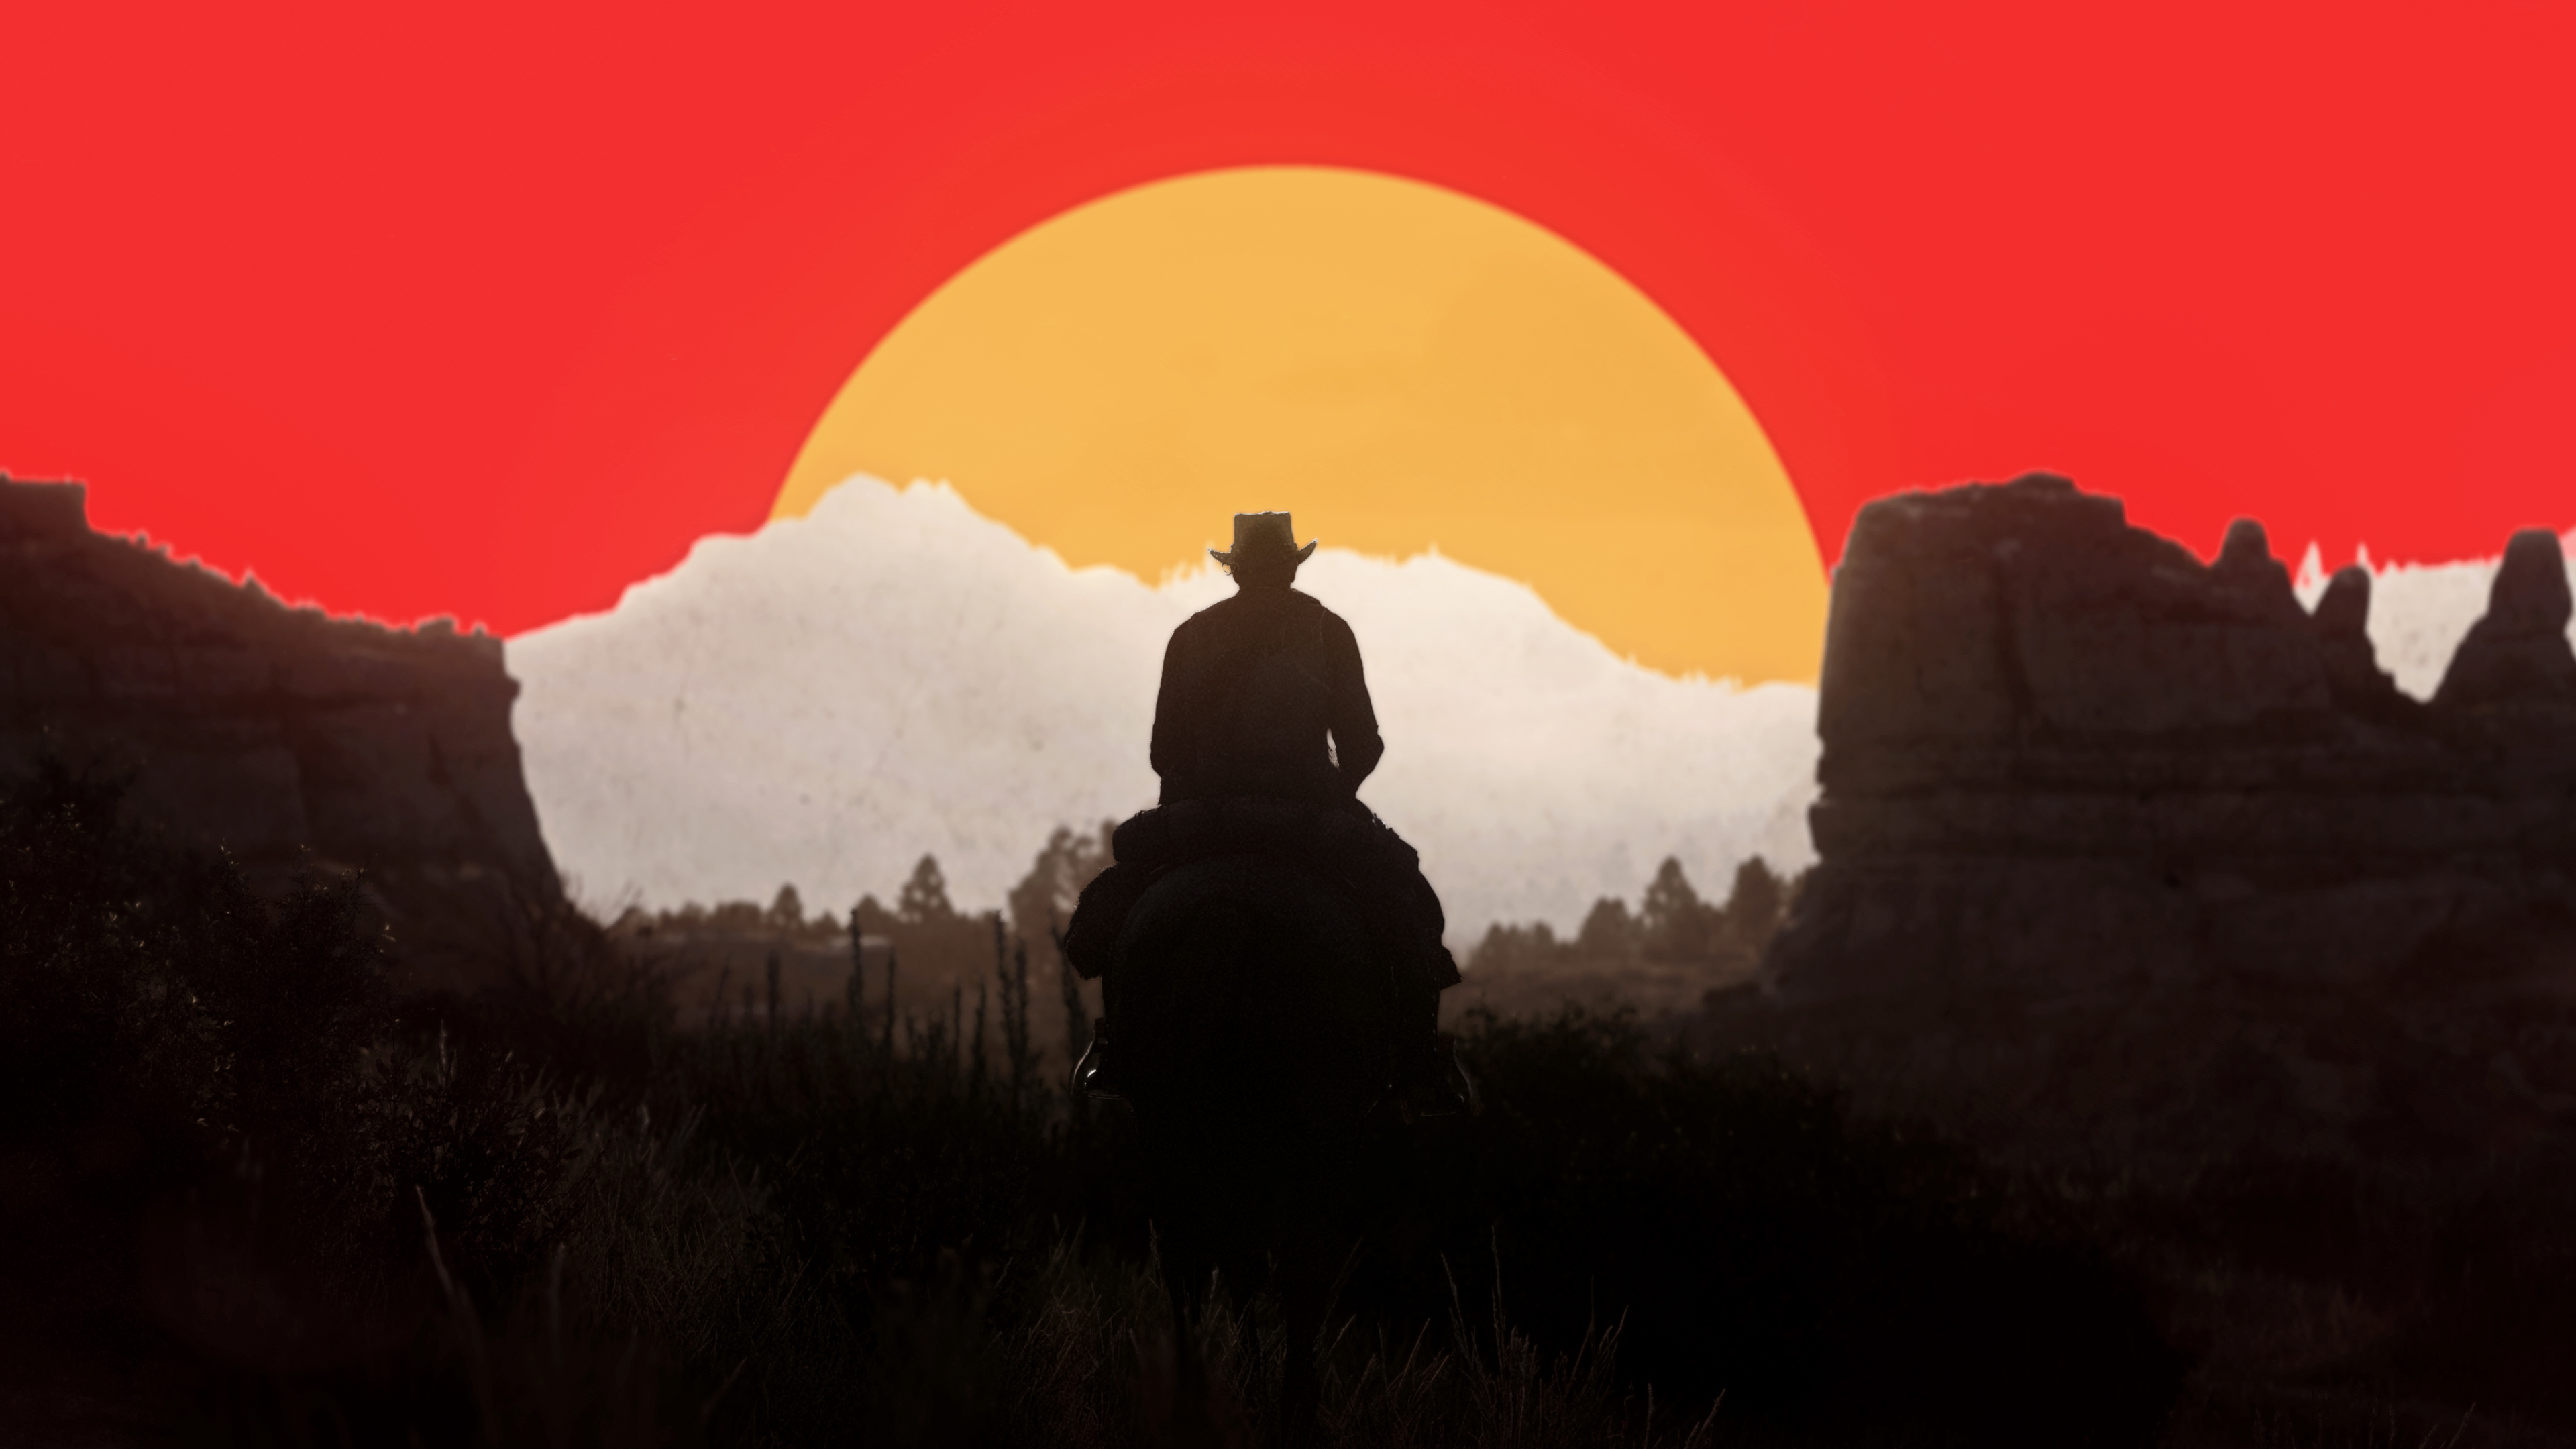 western, red dead redemption 2, arthur morgan, video game, horse, sunset, red dead